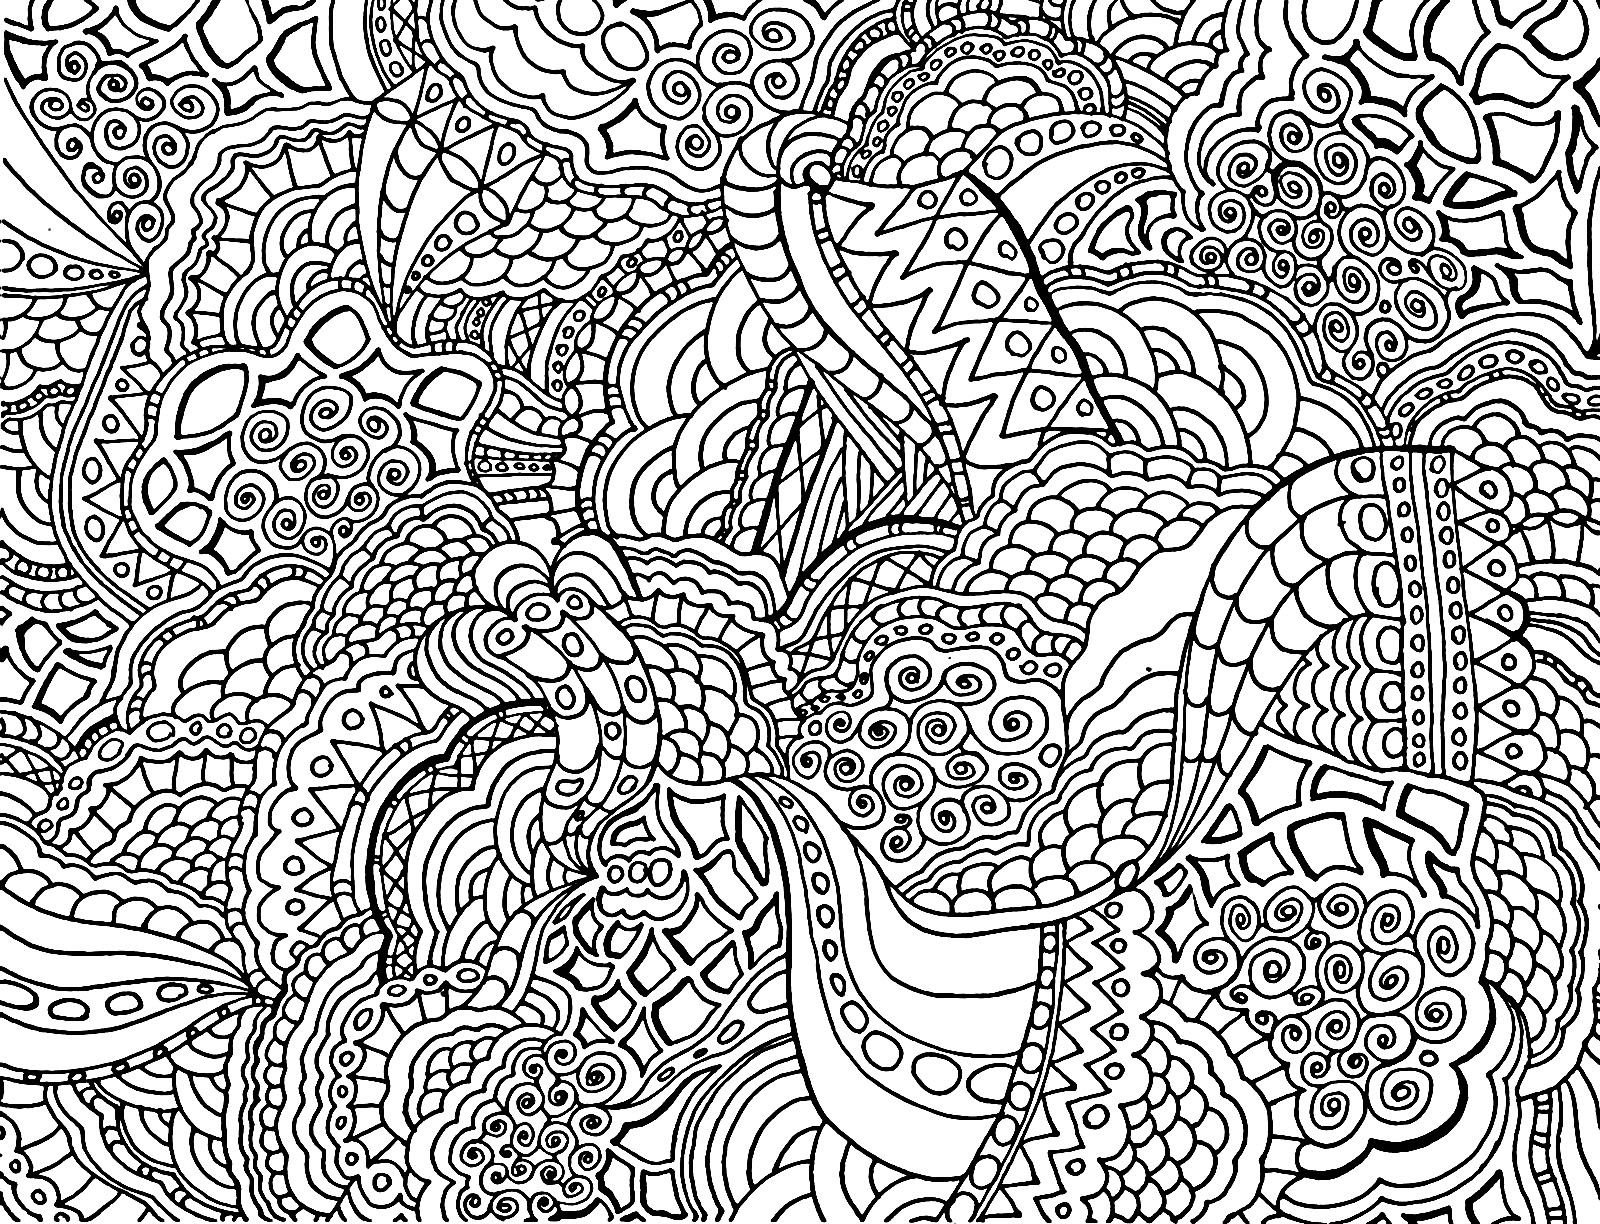 Coloring intricate patterns - fantasy